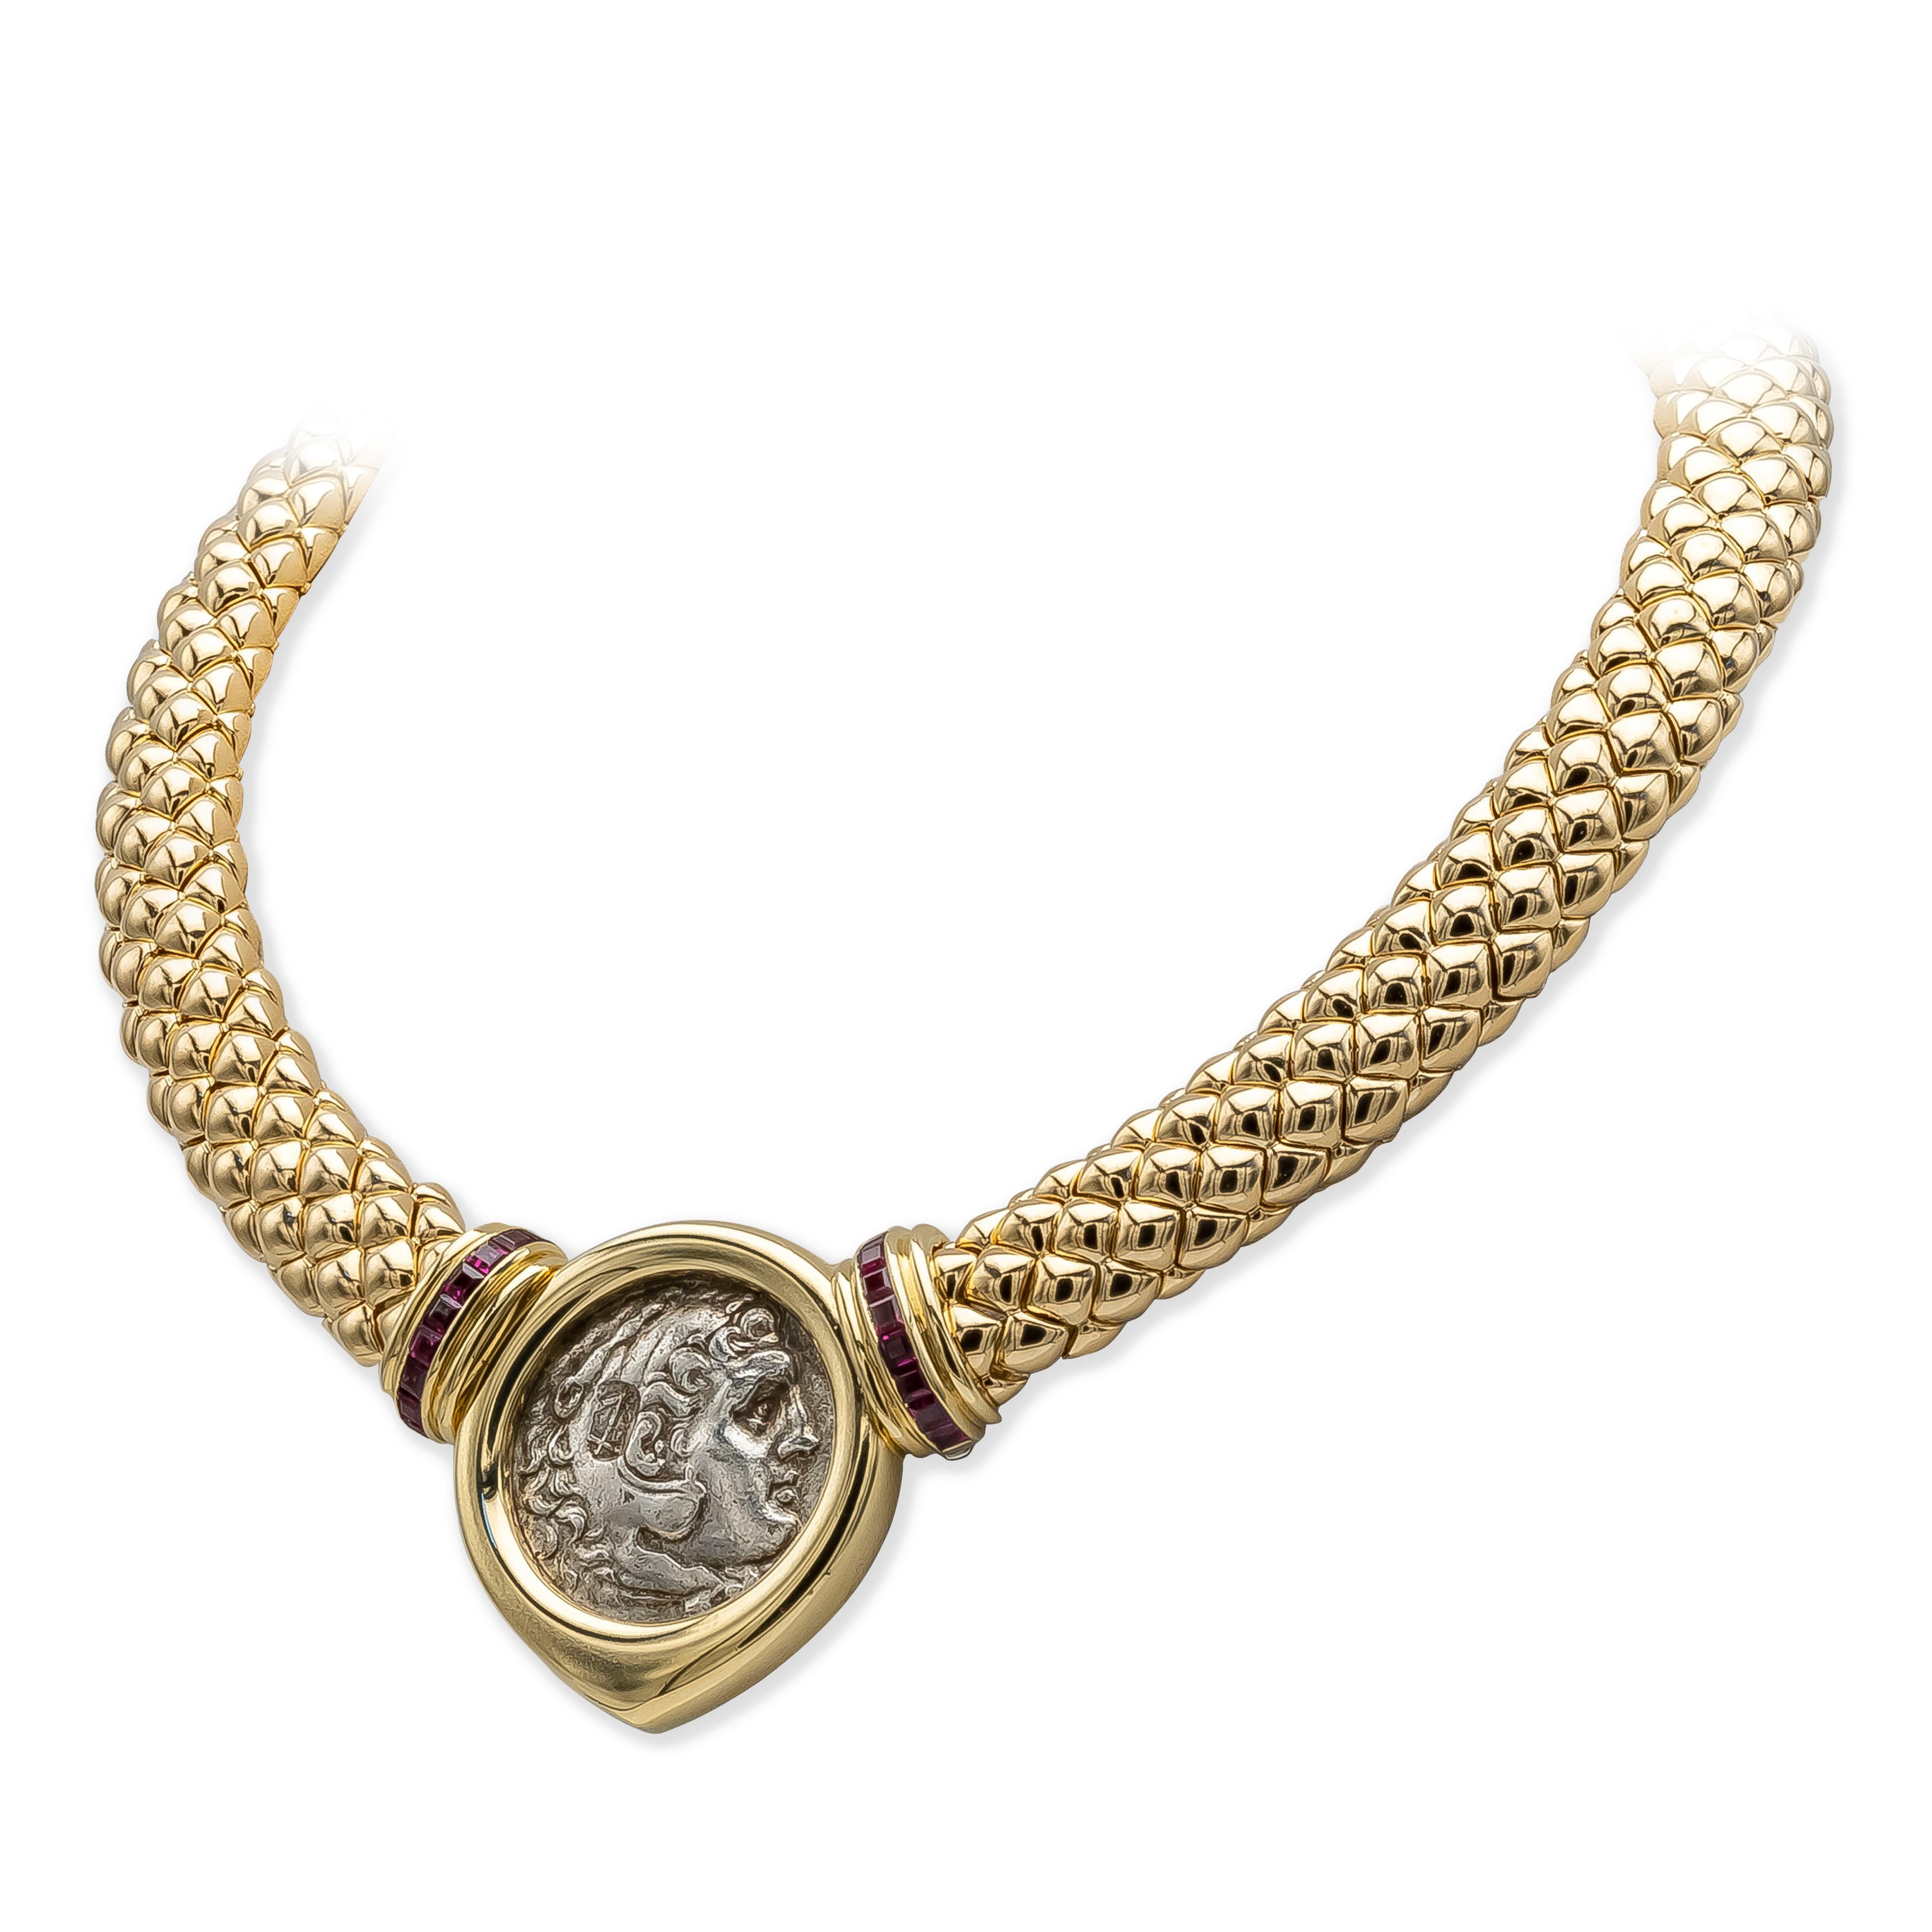 A thick collar necklace, featuring a snake skin design made with solid 18K yellow gold and a removable Greek silver drachma coin of Alexander the Great. Accented by a row on each side of princess cut rubies weighing 2.70 carats total and designed